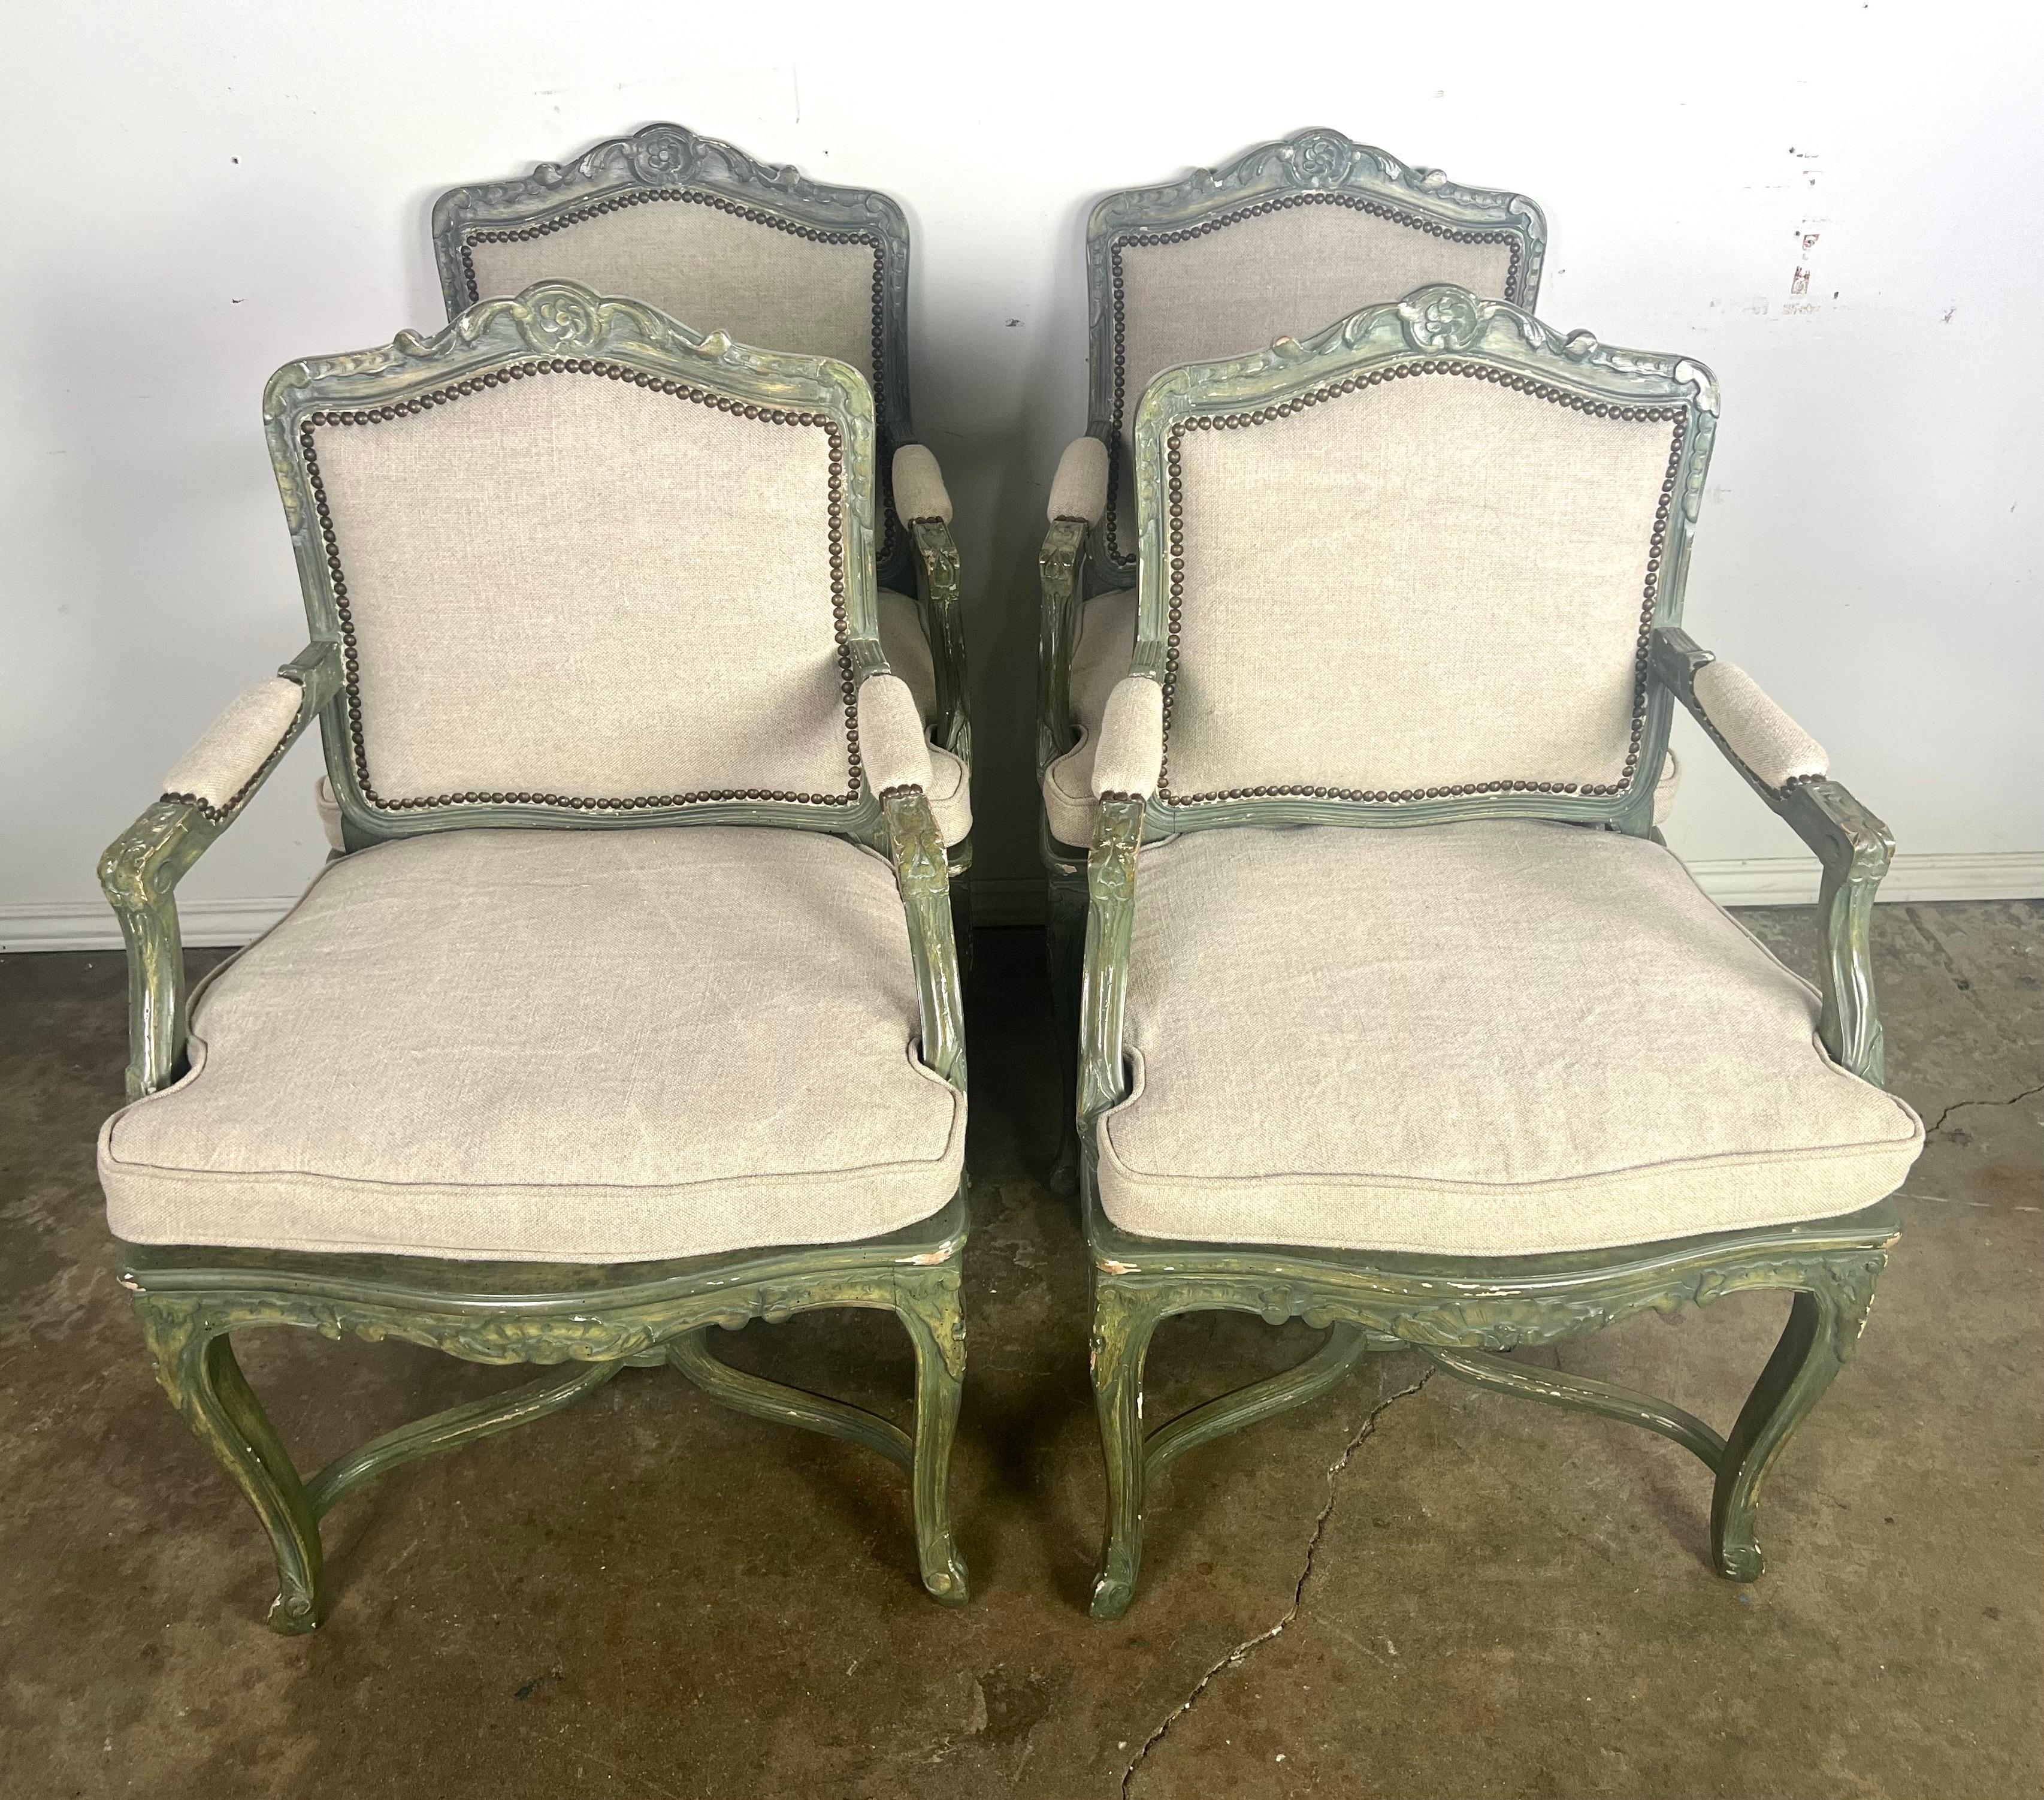 This set of chairs are beautifully crafted  in a Louis XV style, featuring a distinctive painted frame in a soft green hue with subtle gilt accents.  The chairs are adorned with elegant, open arms and stand on gracefully curved cabriole legs.  The